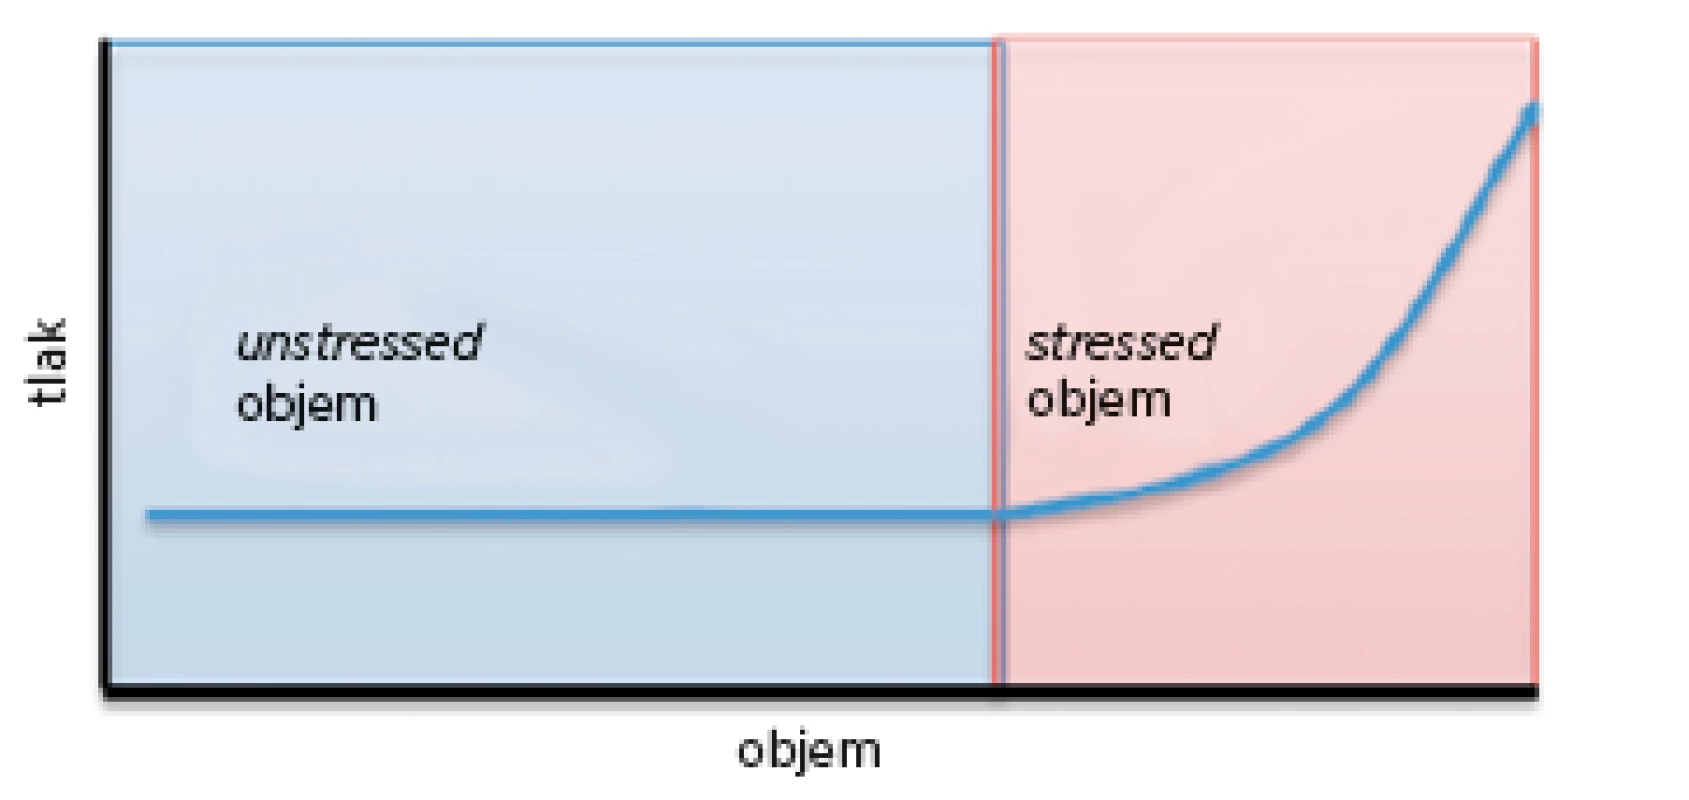 &lt;i&gt;Unstressed a stressed&lt;/i&gt; objemy